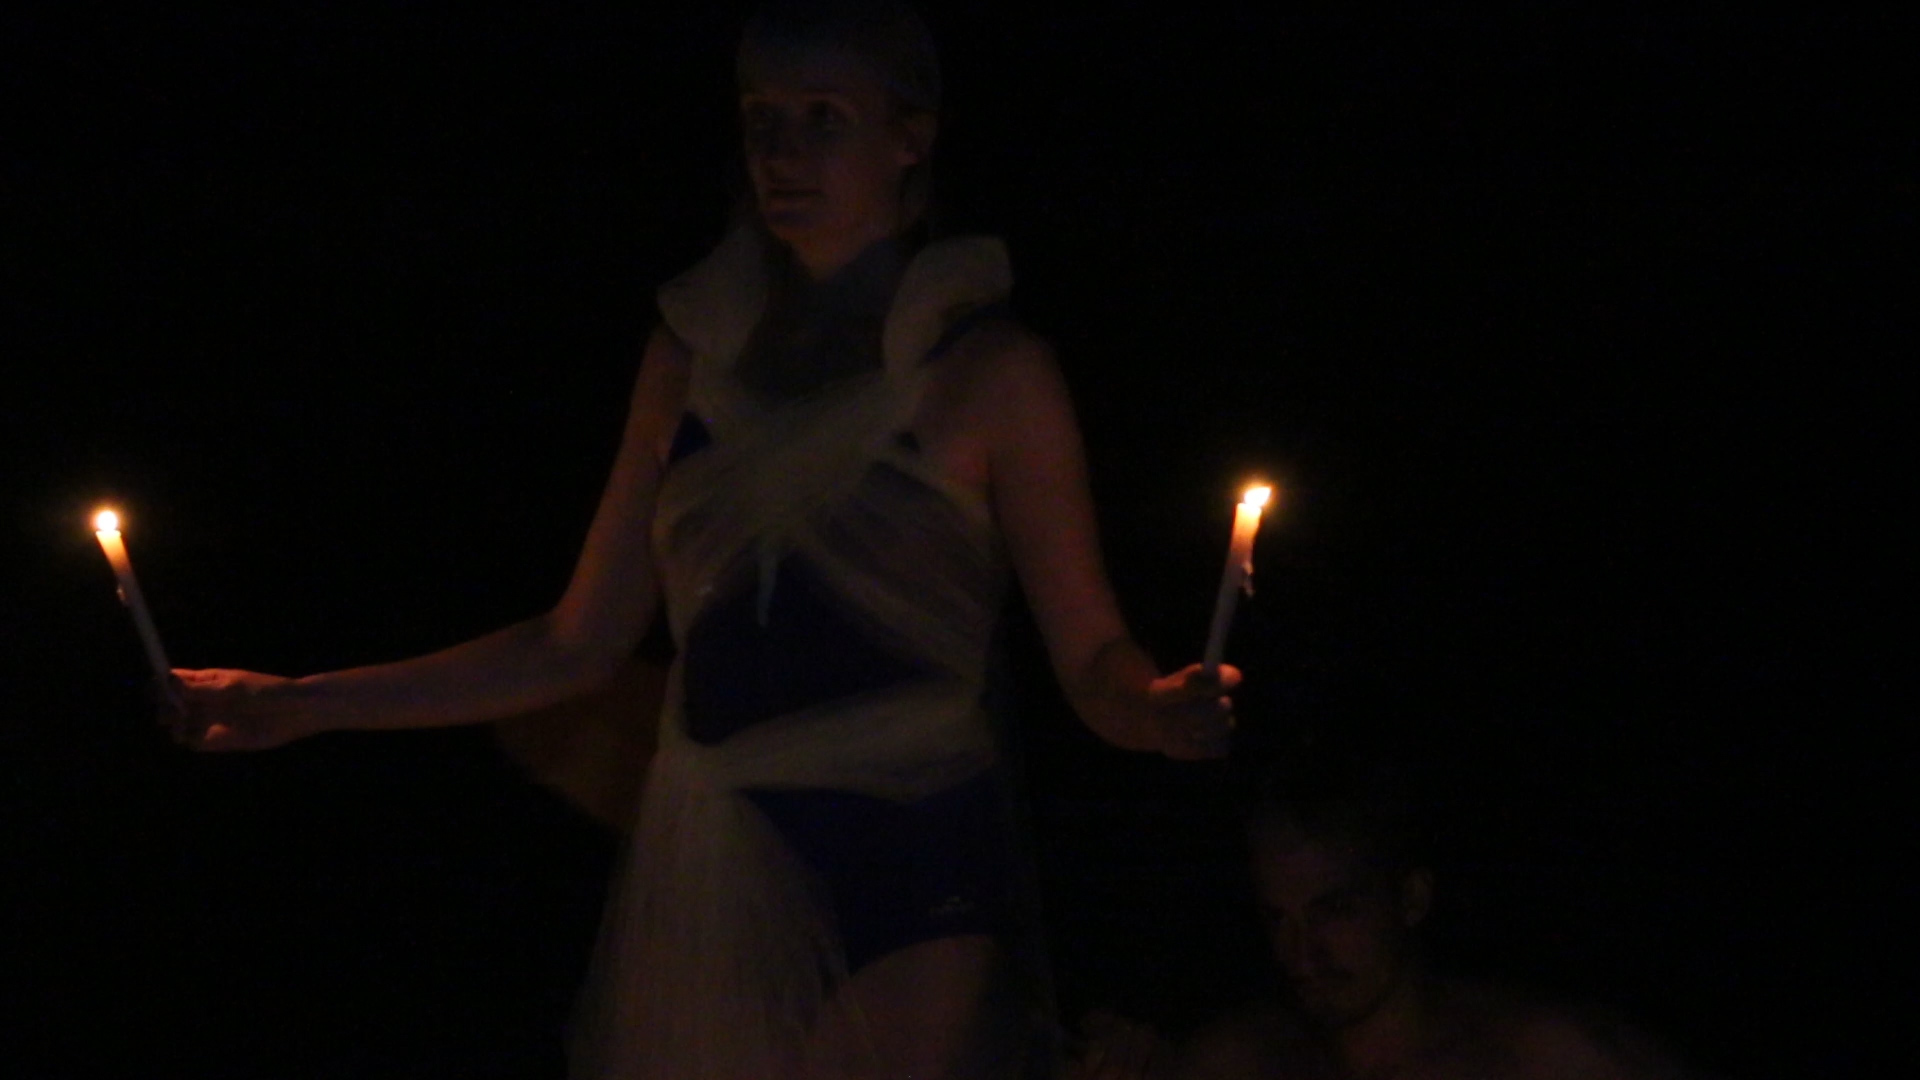 QUINZE / A Video Performance by Elise Ehry